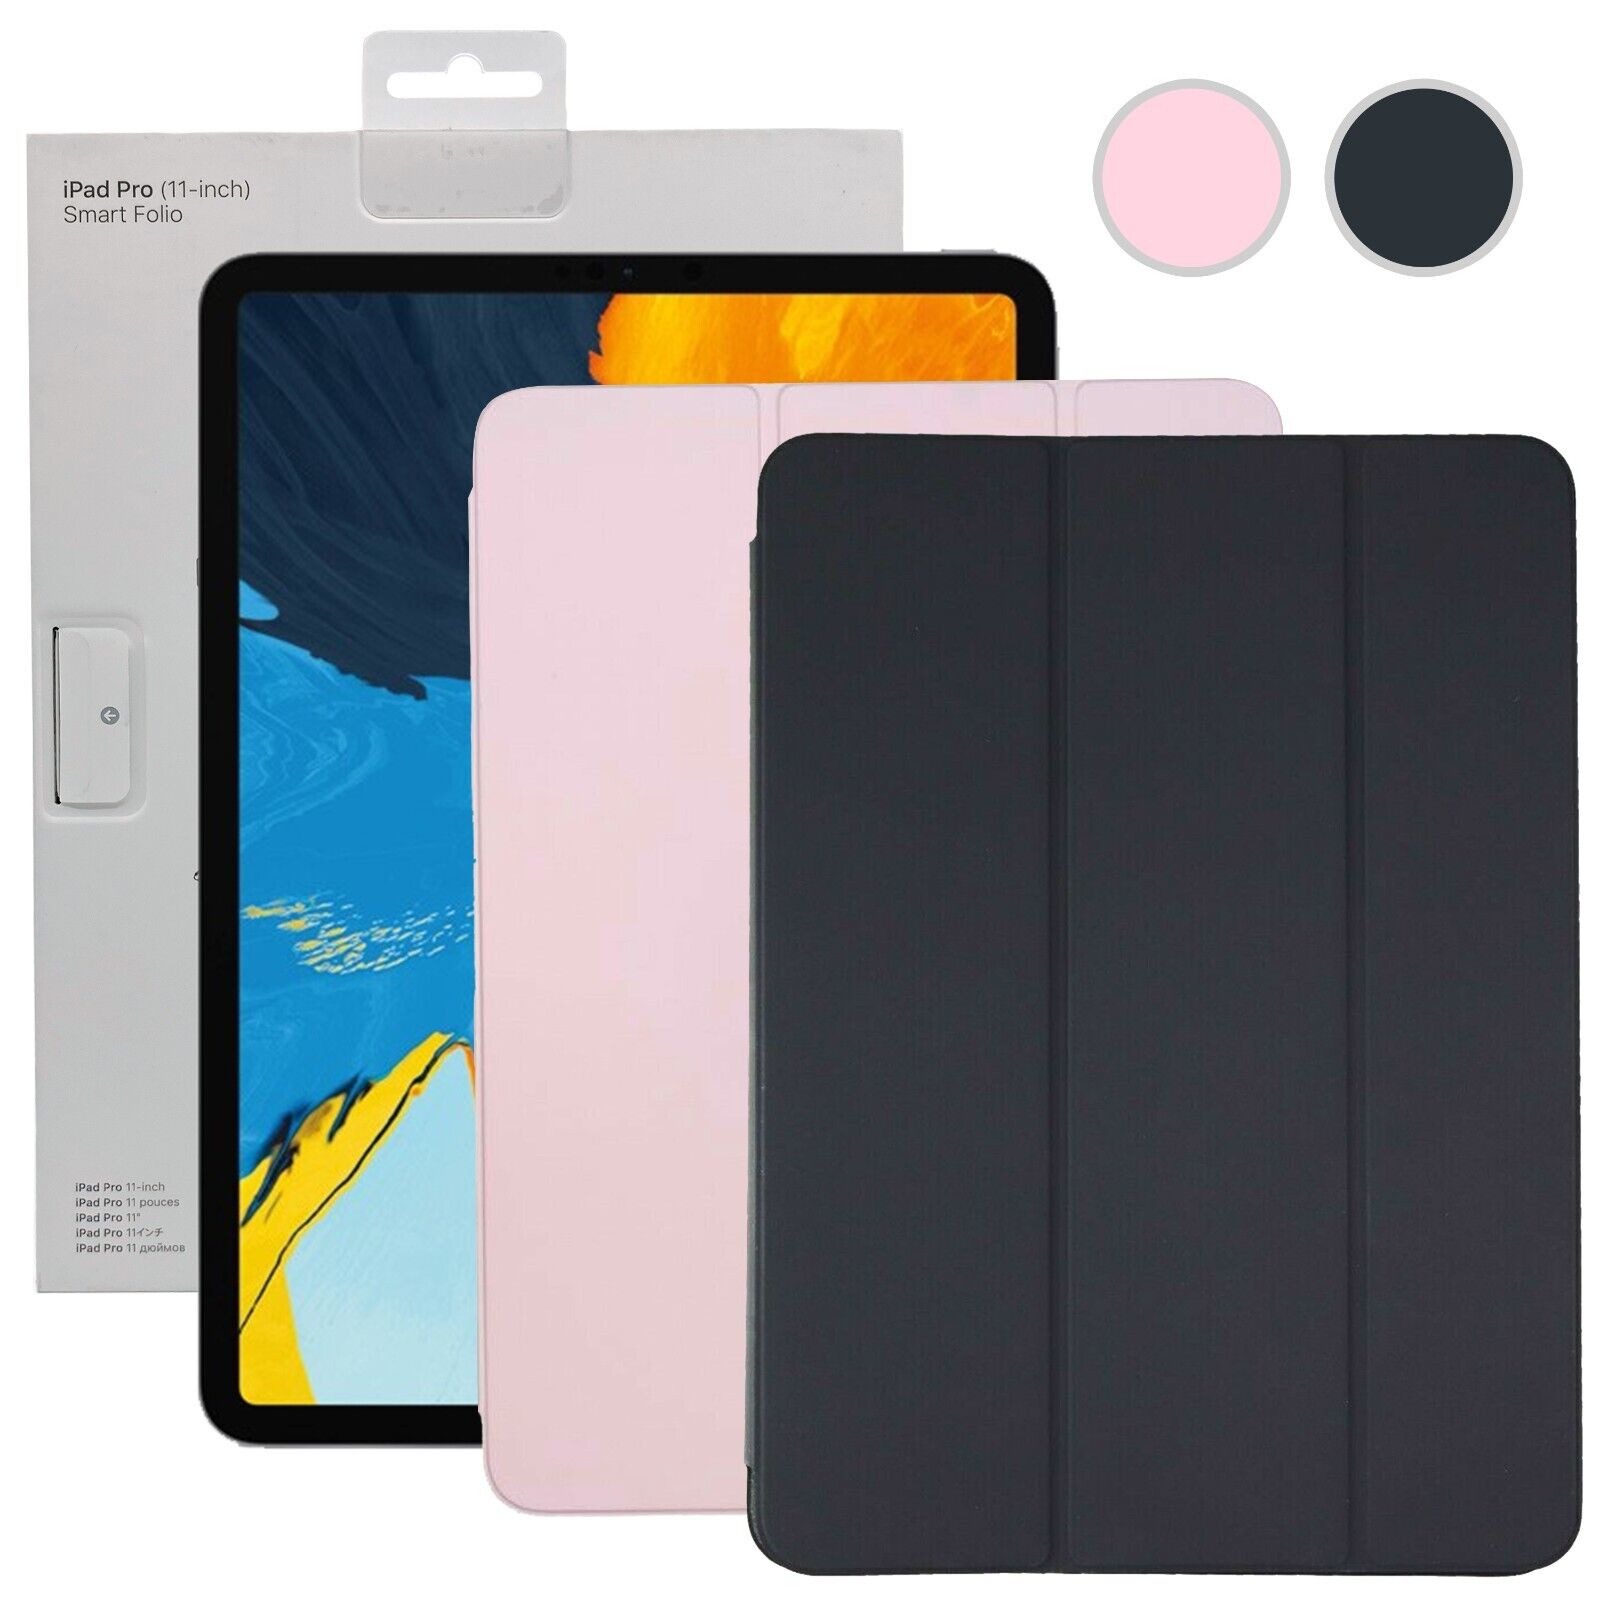 Apple Smart Folio for iPad Pro 11-inch and Ipad Air 4th & 5th gen - Choose Color